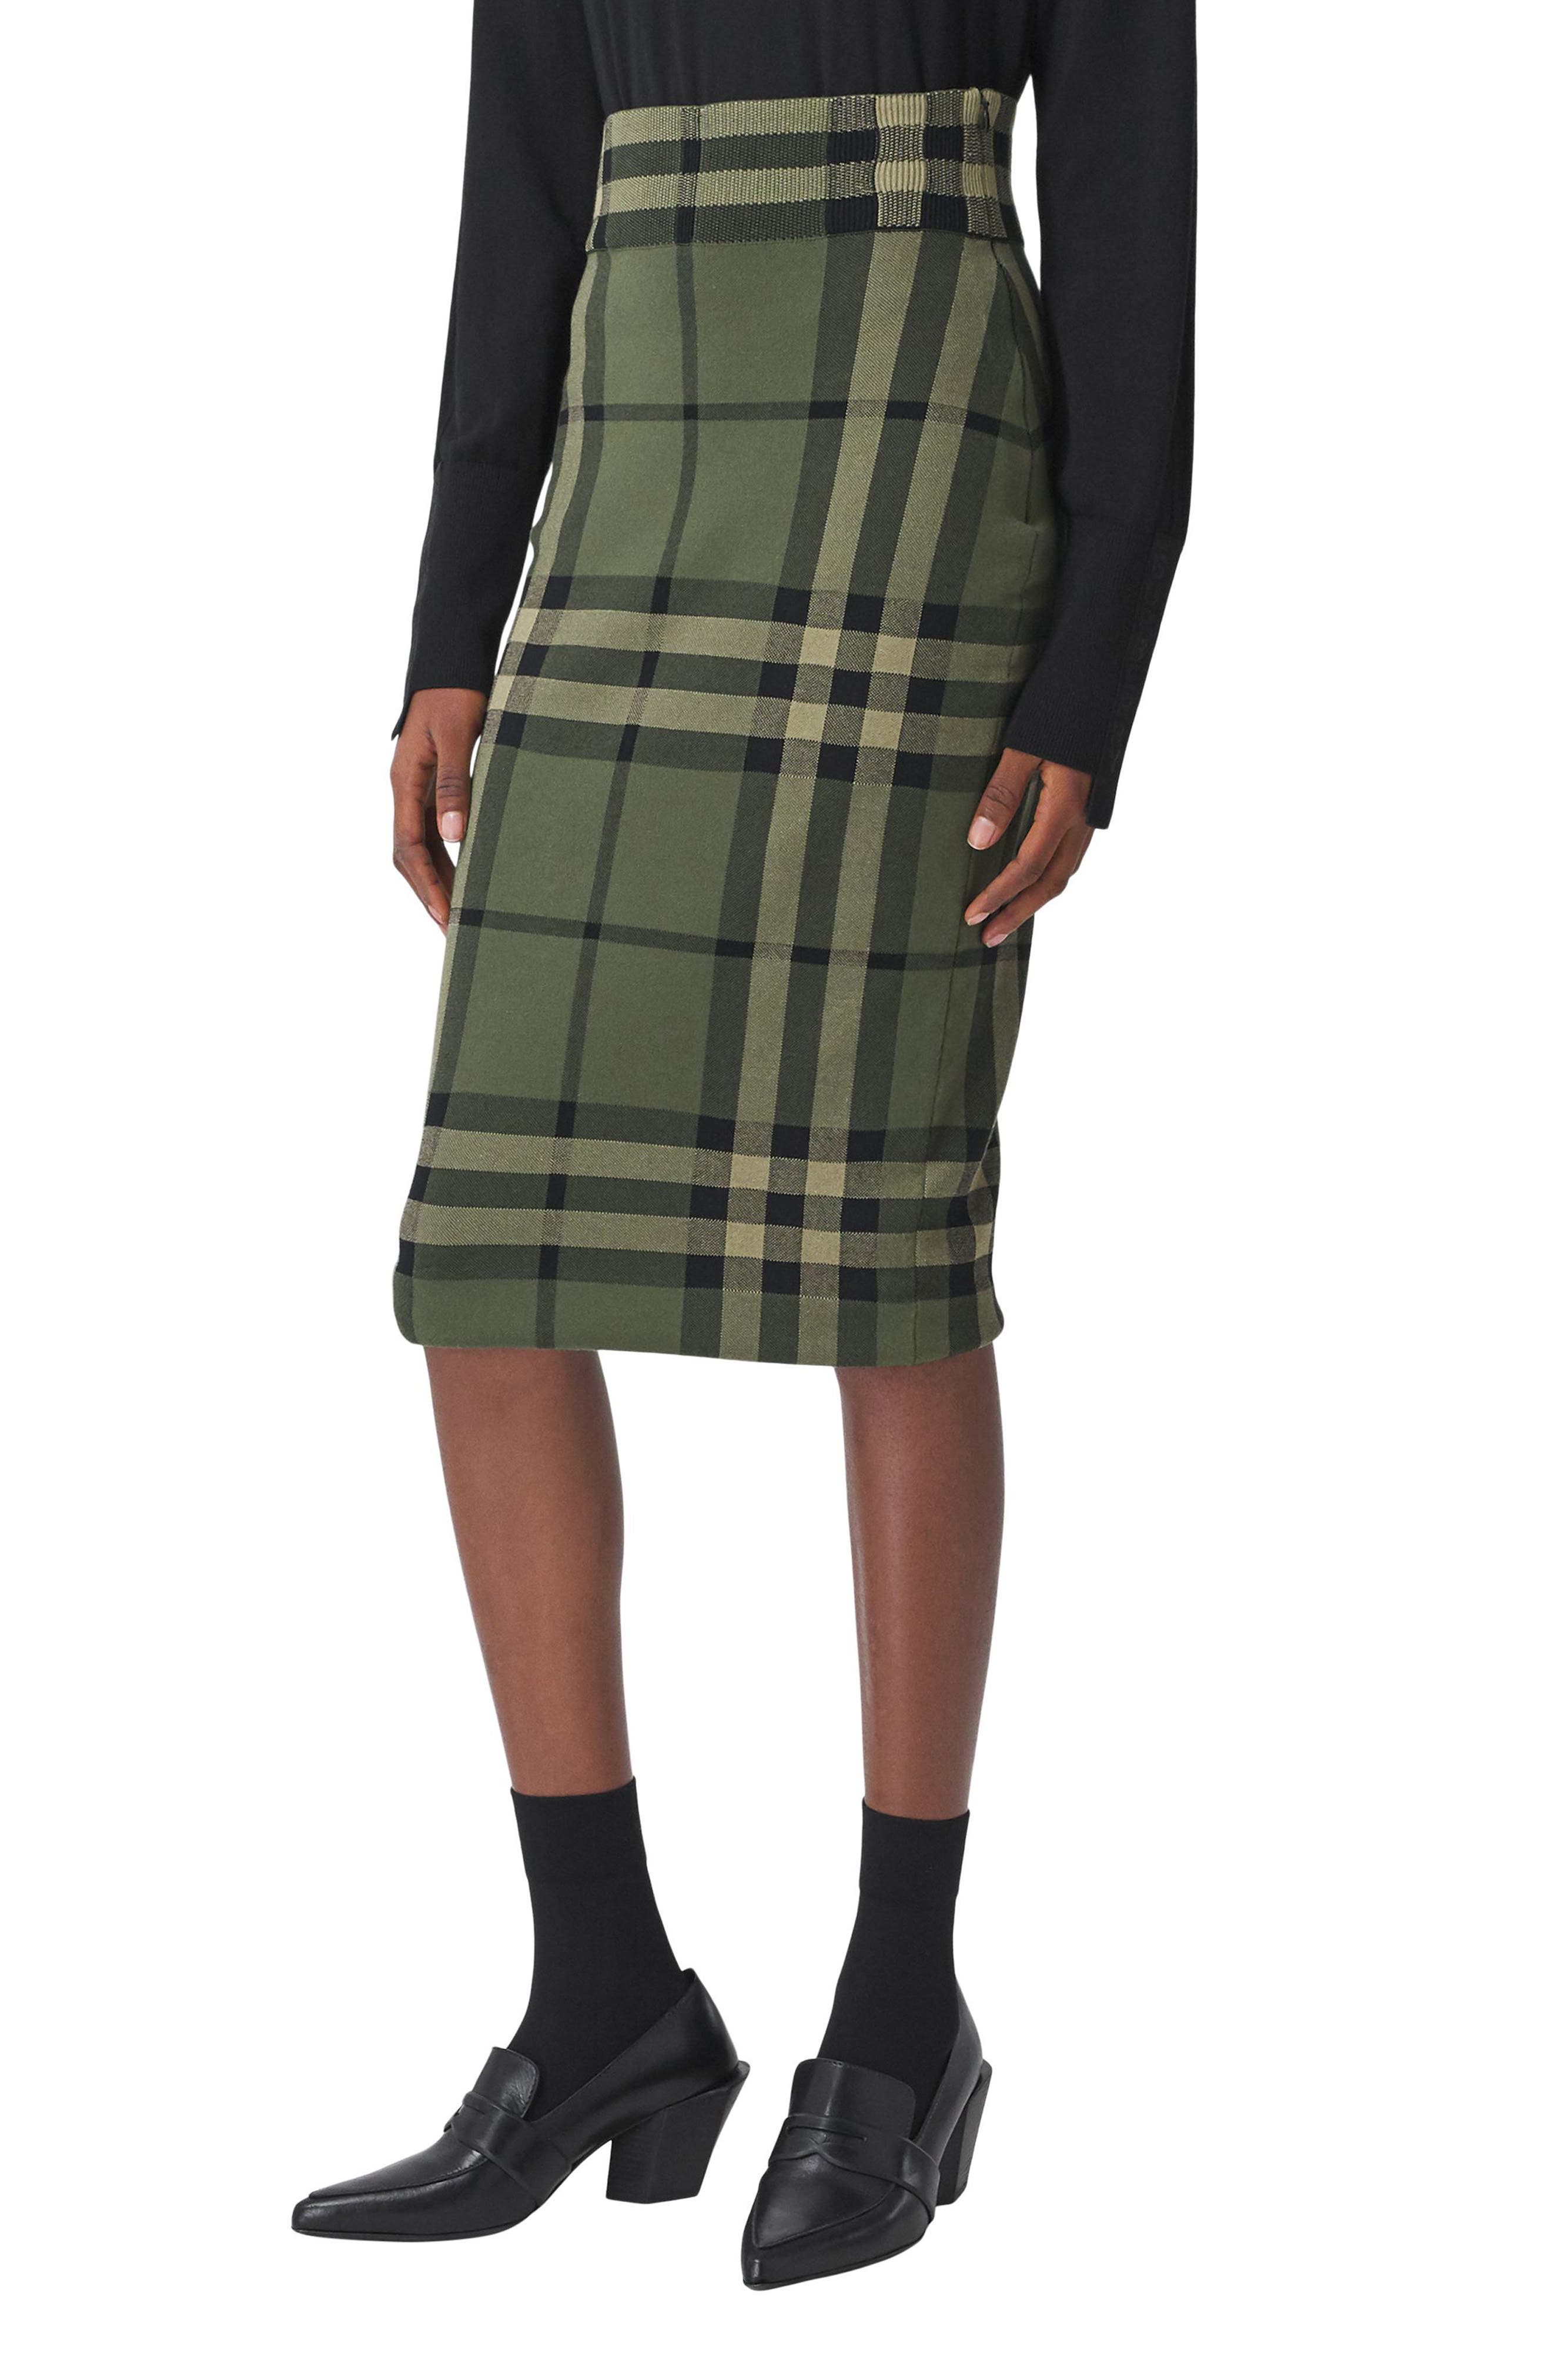 Burberry Kammie Check High Waist Pencil Skirt in Military Green at Nordstrom, Size Medium